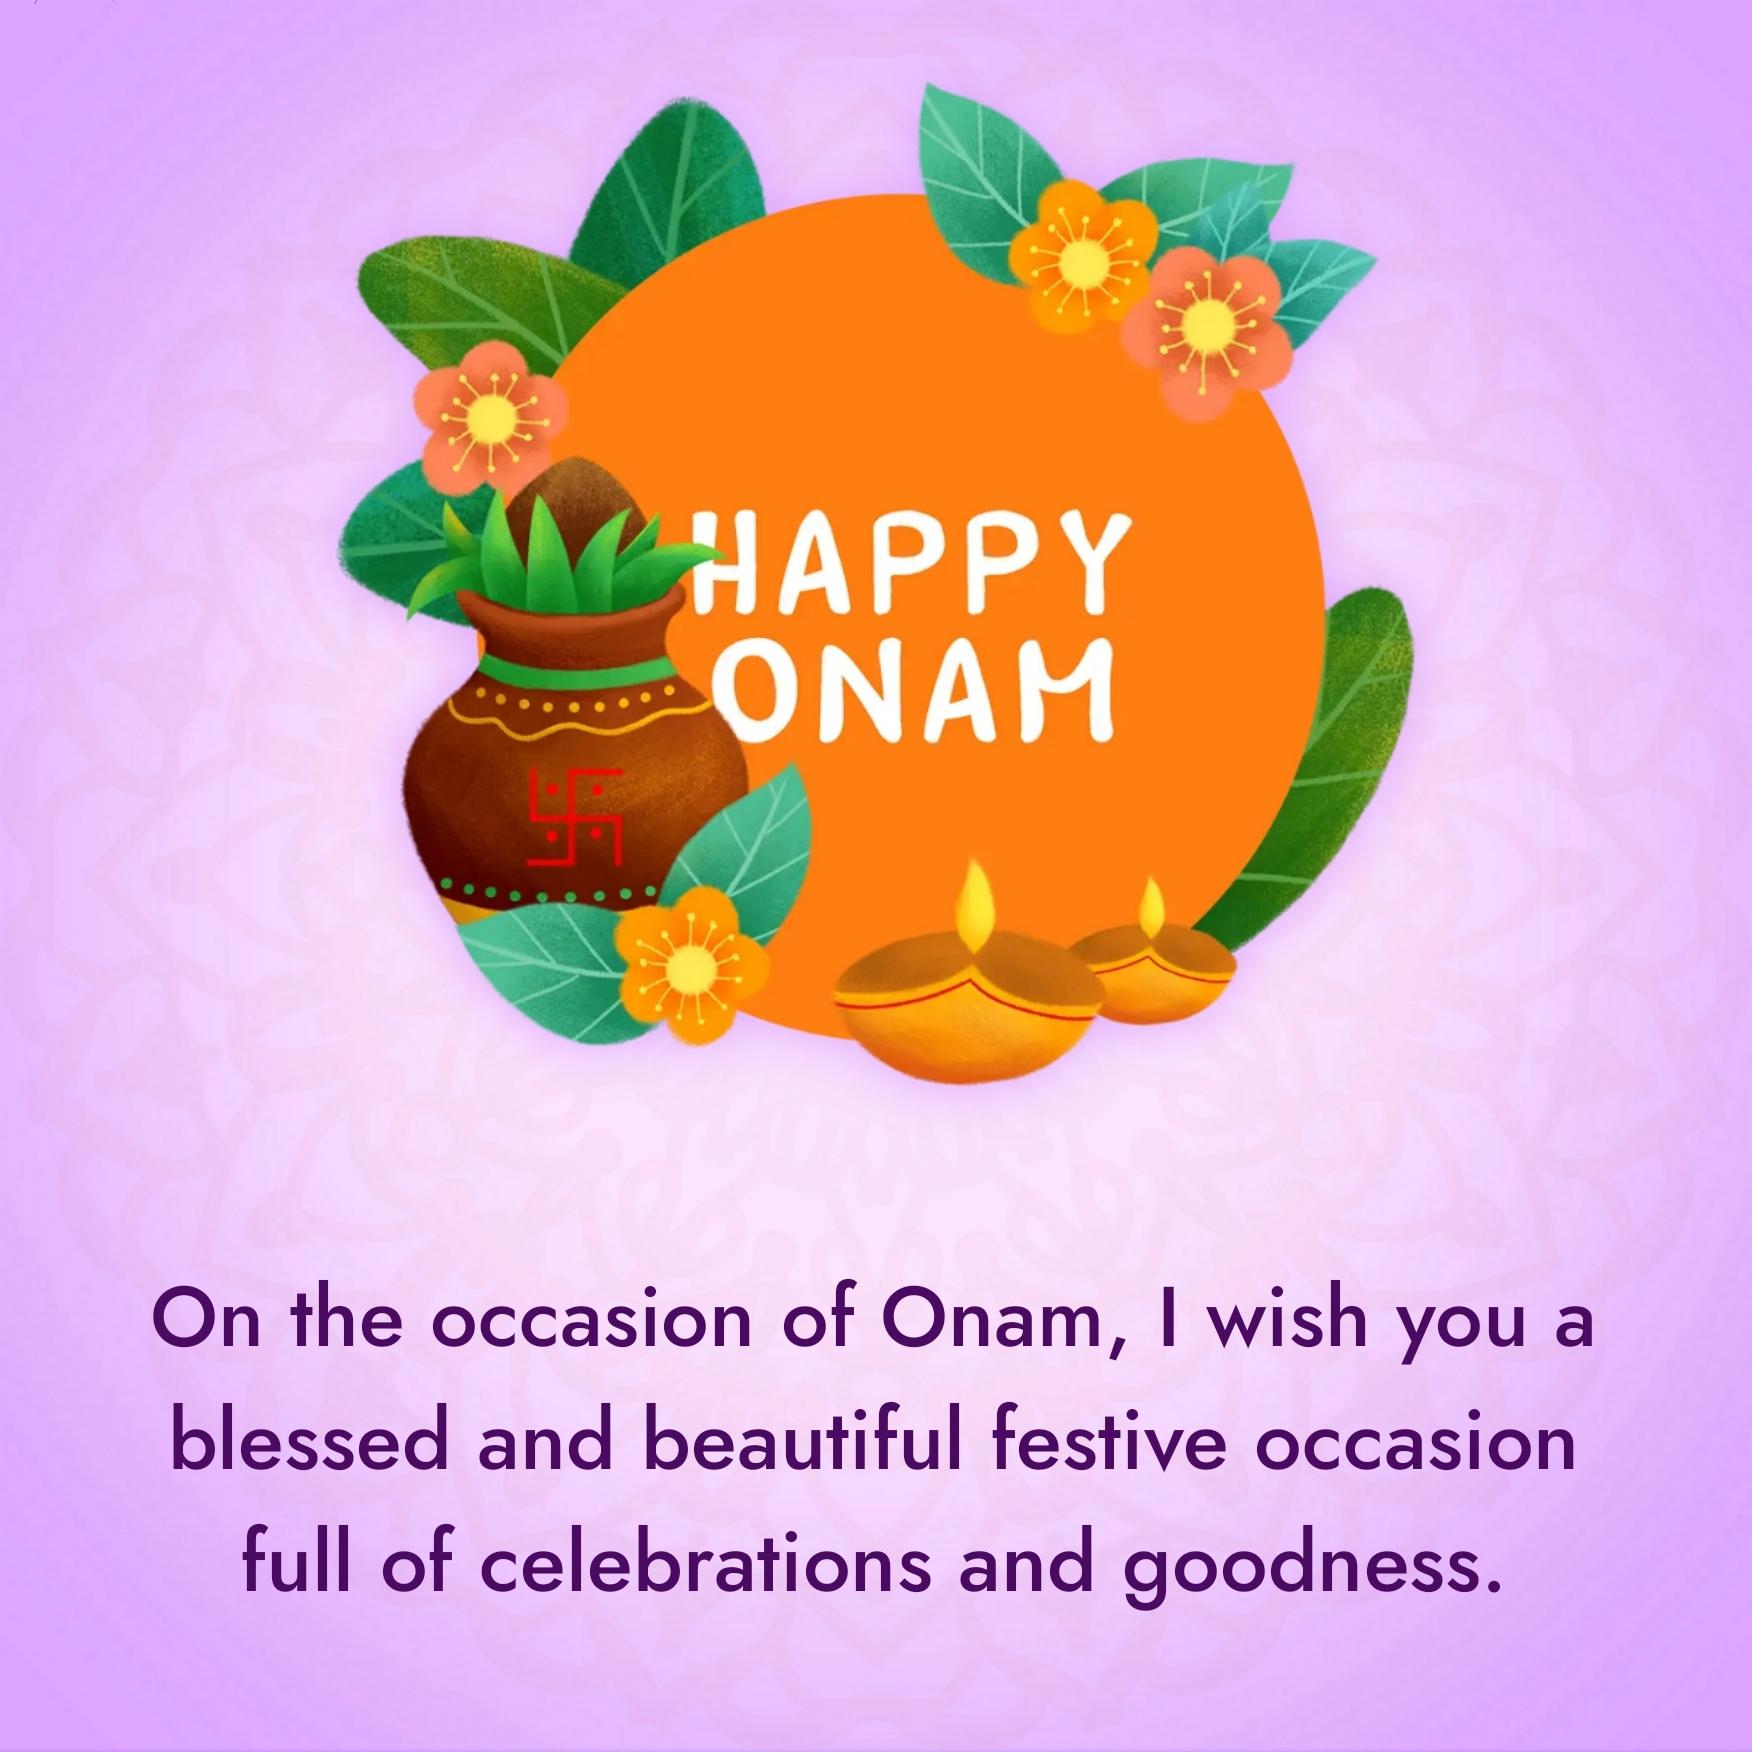 On the occasion of Onam I wish you a blessed and beautiful